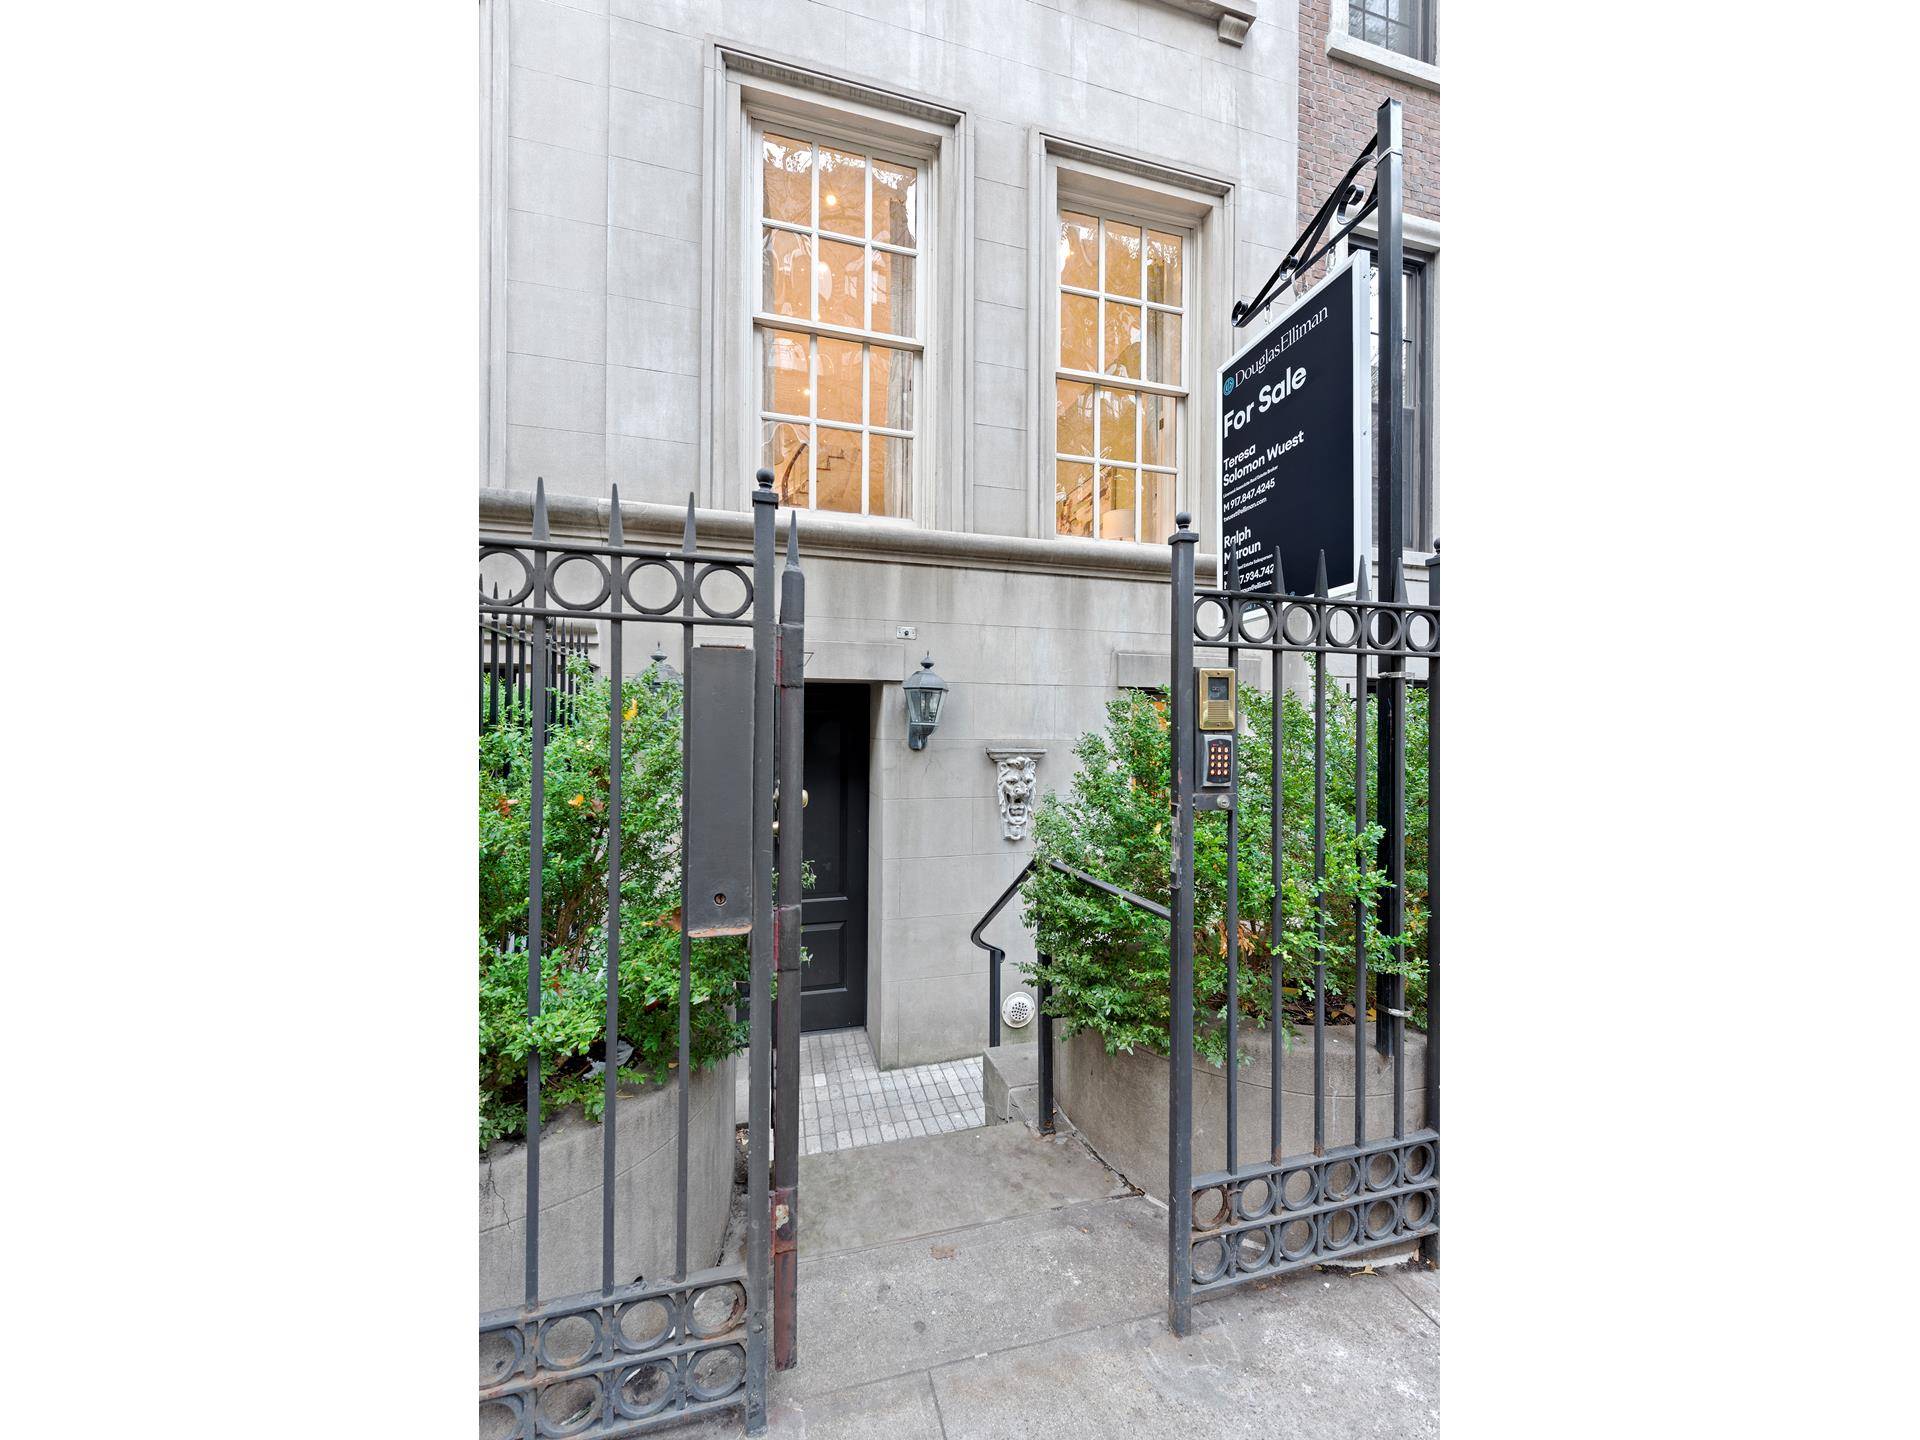 Located on a beautiful townhouse block in Lenox Hill, this turnkey, single family residence is ready for its next owner.